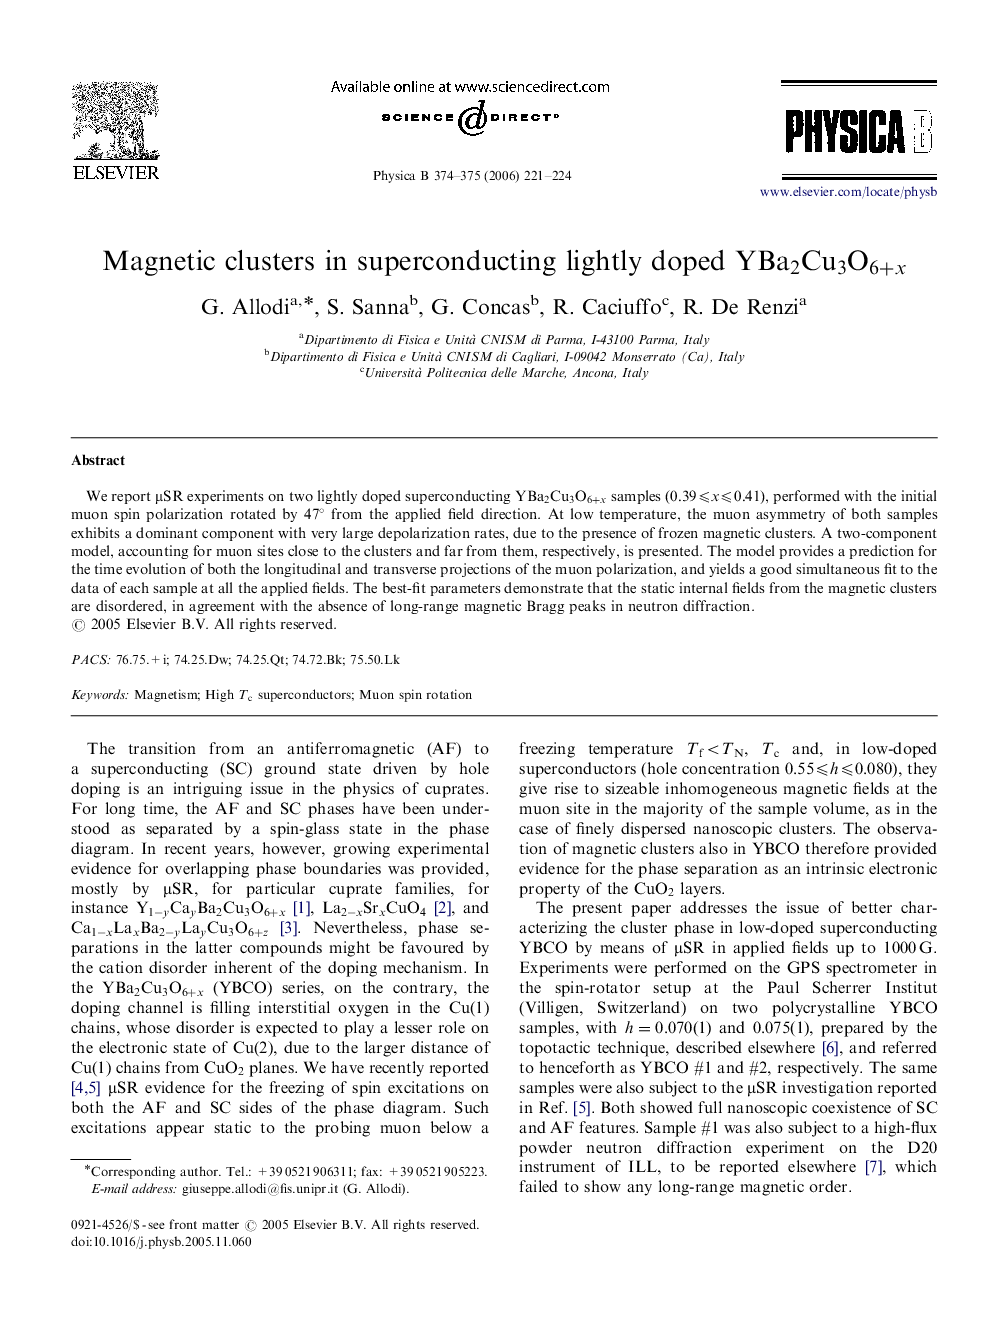 Magnetic clusters in superconducting lightly doped YBa2Cu3O6+x